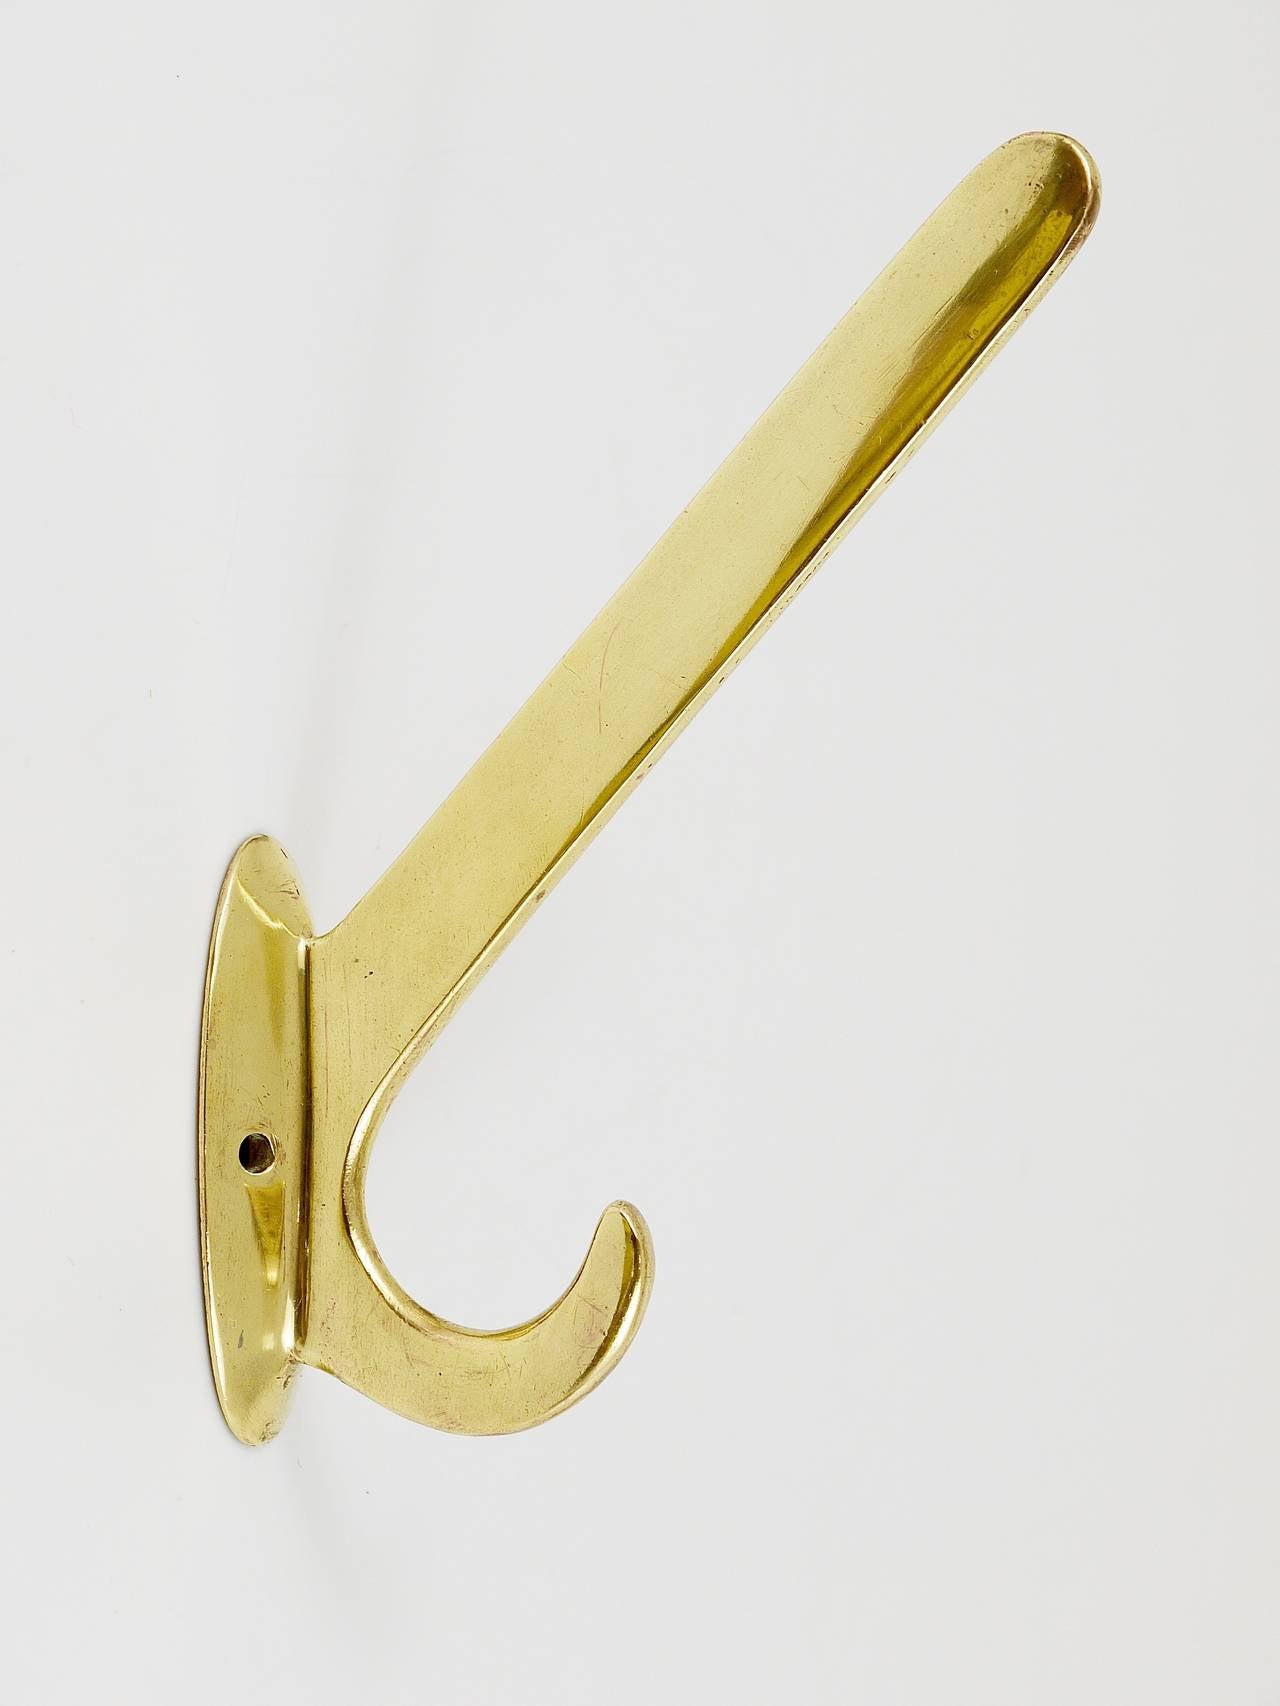 Up to four beautiful brass wall hooks, handmade in the 1920s, Vienna, Austria. Gently polished by hand, in excellent condition with marginal patina. Sold and priced per piece.